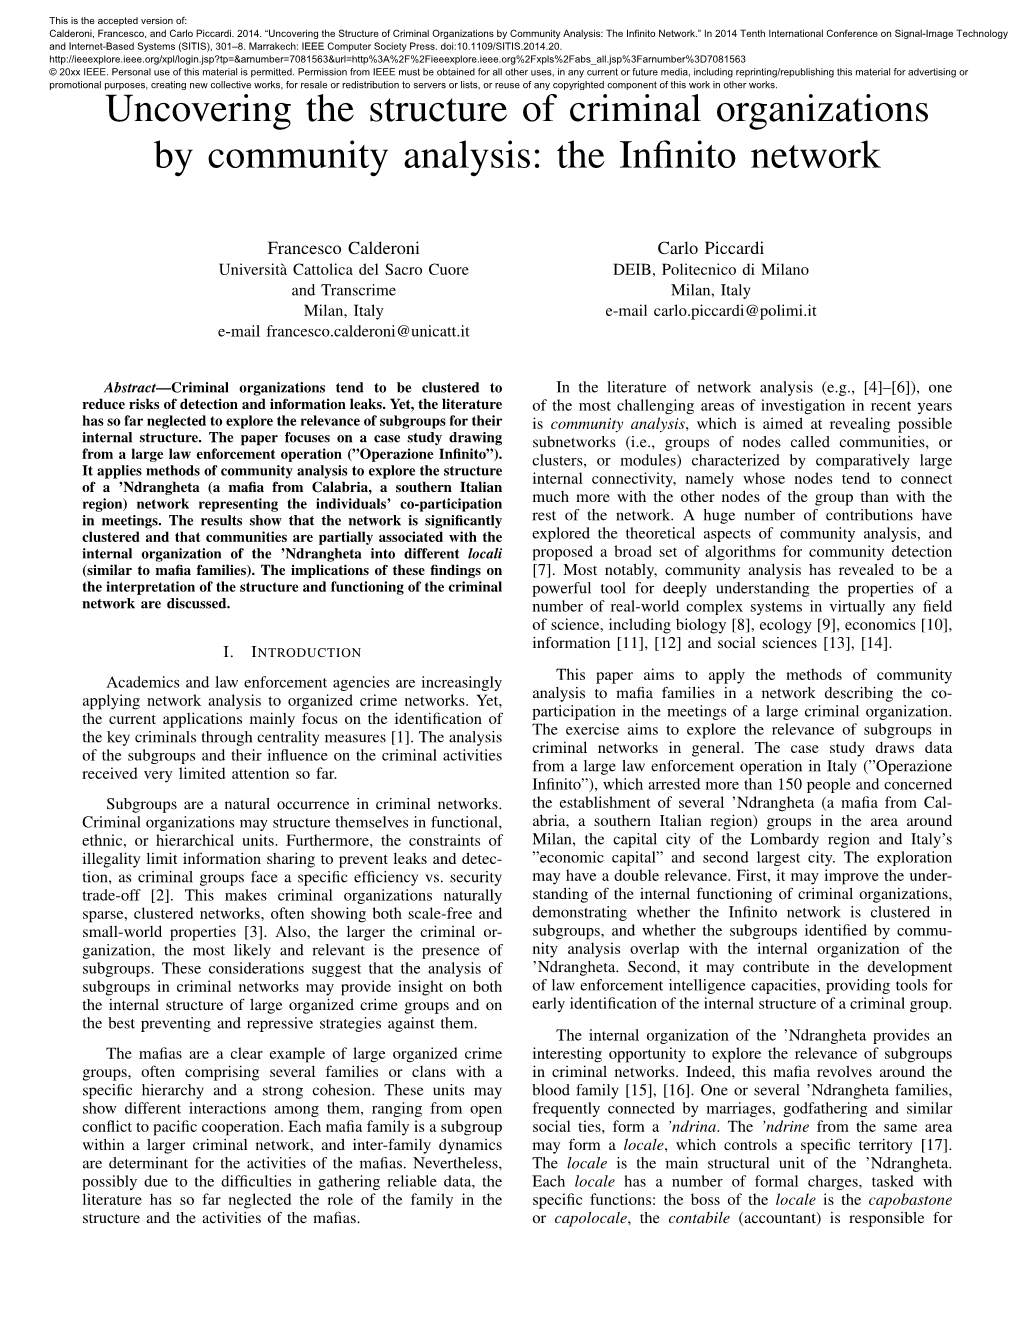 Uncovering the Structure of Criminal Organizations by Community Analysis: the Inﬁnito Network